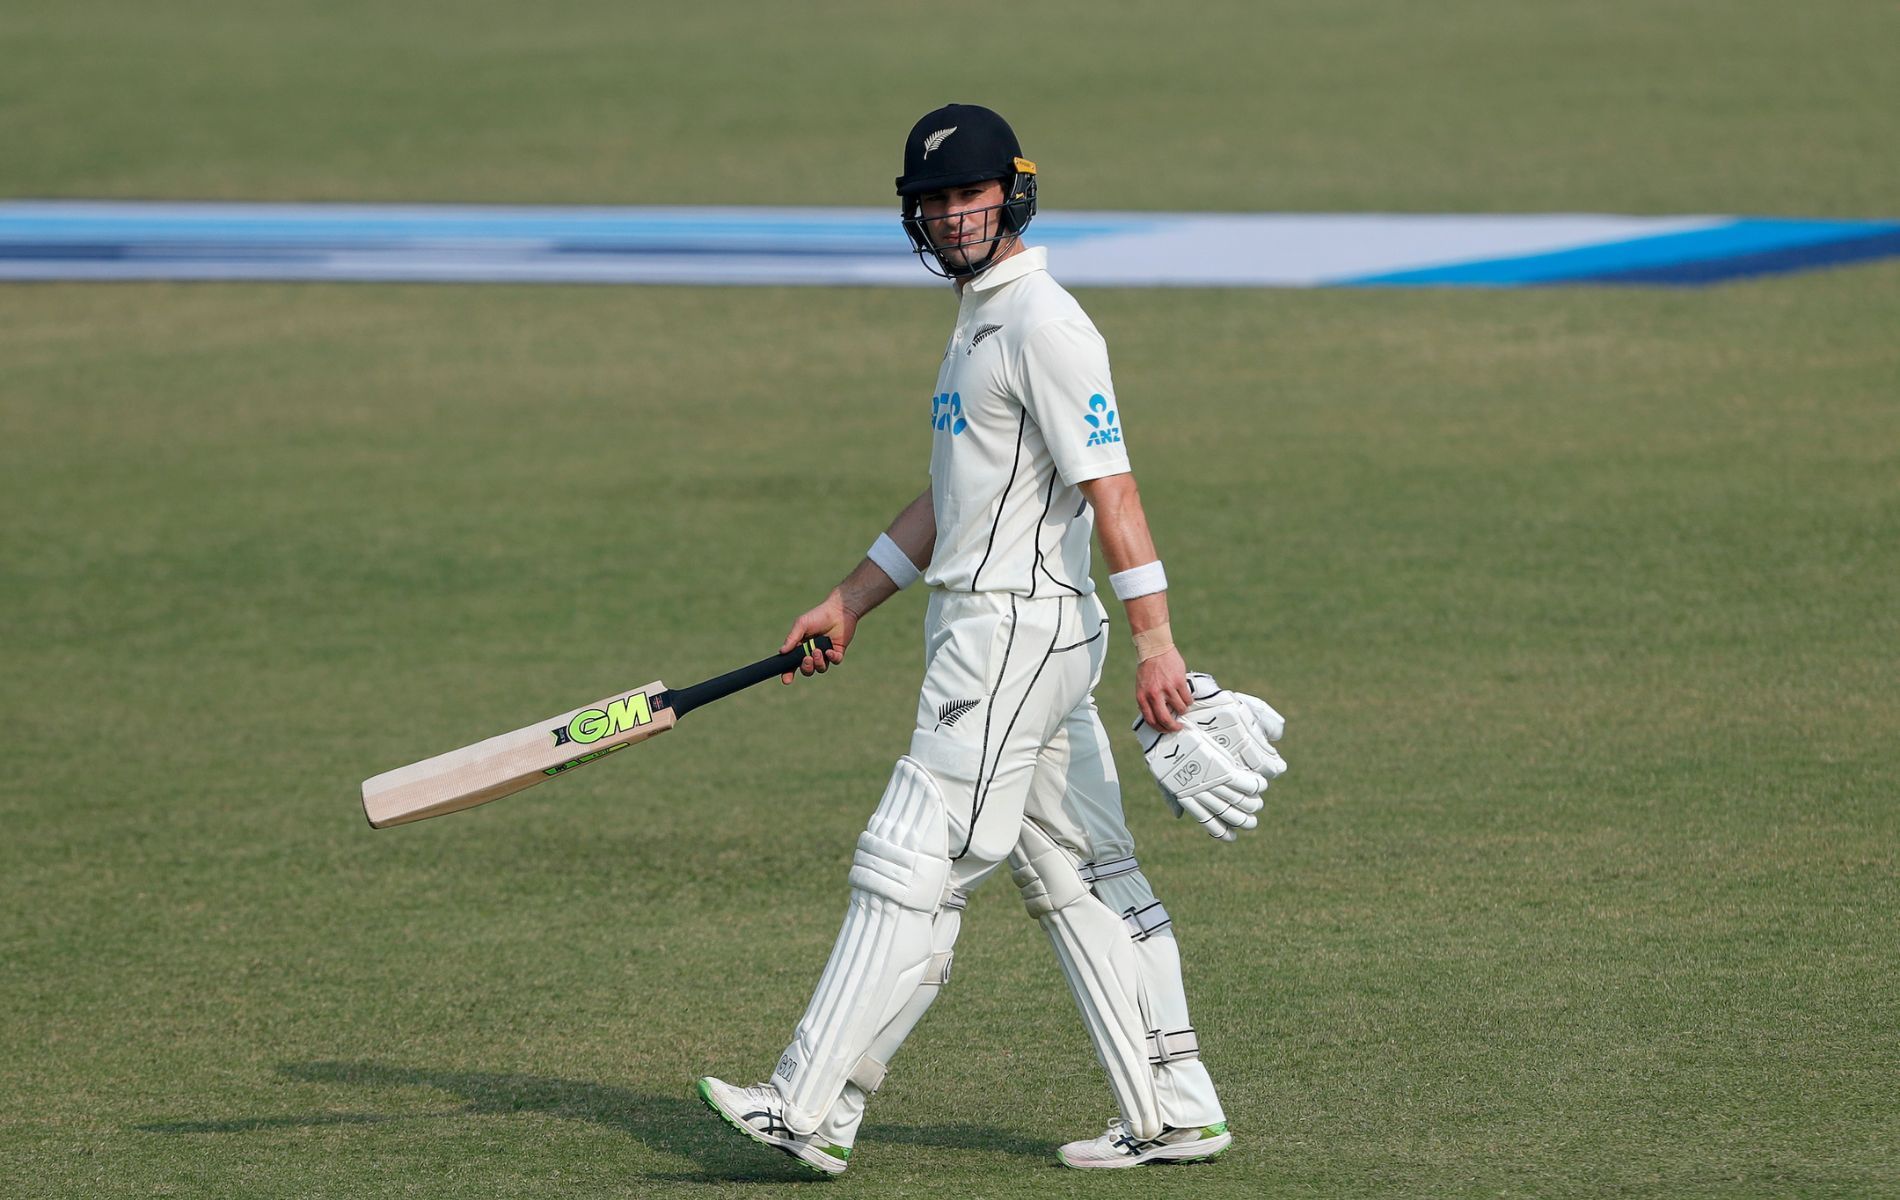 Will Young made his career best score of 89 in the first Test against India.